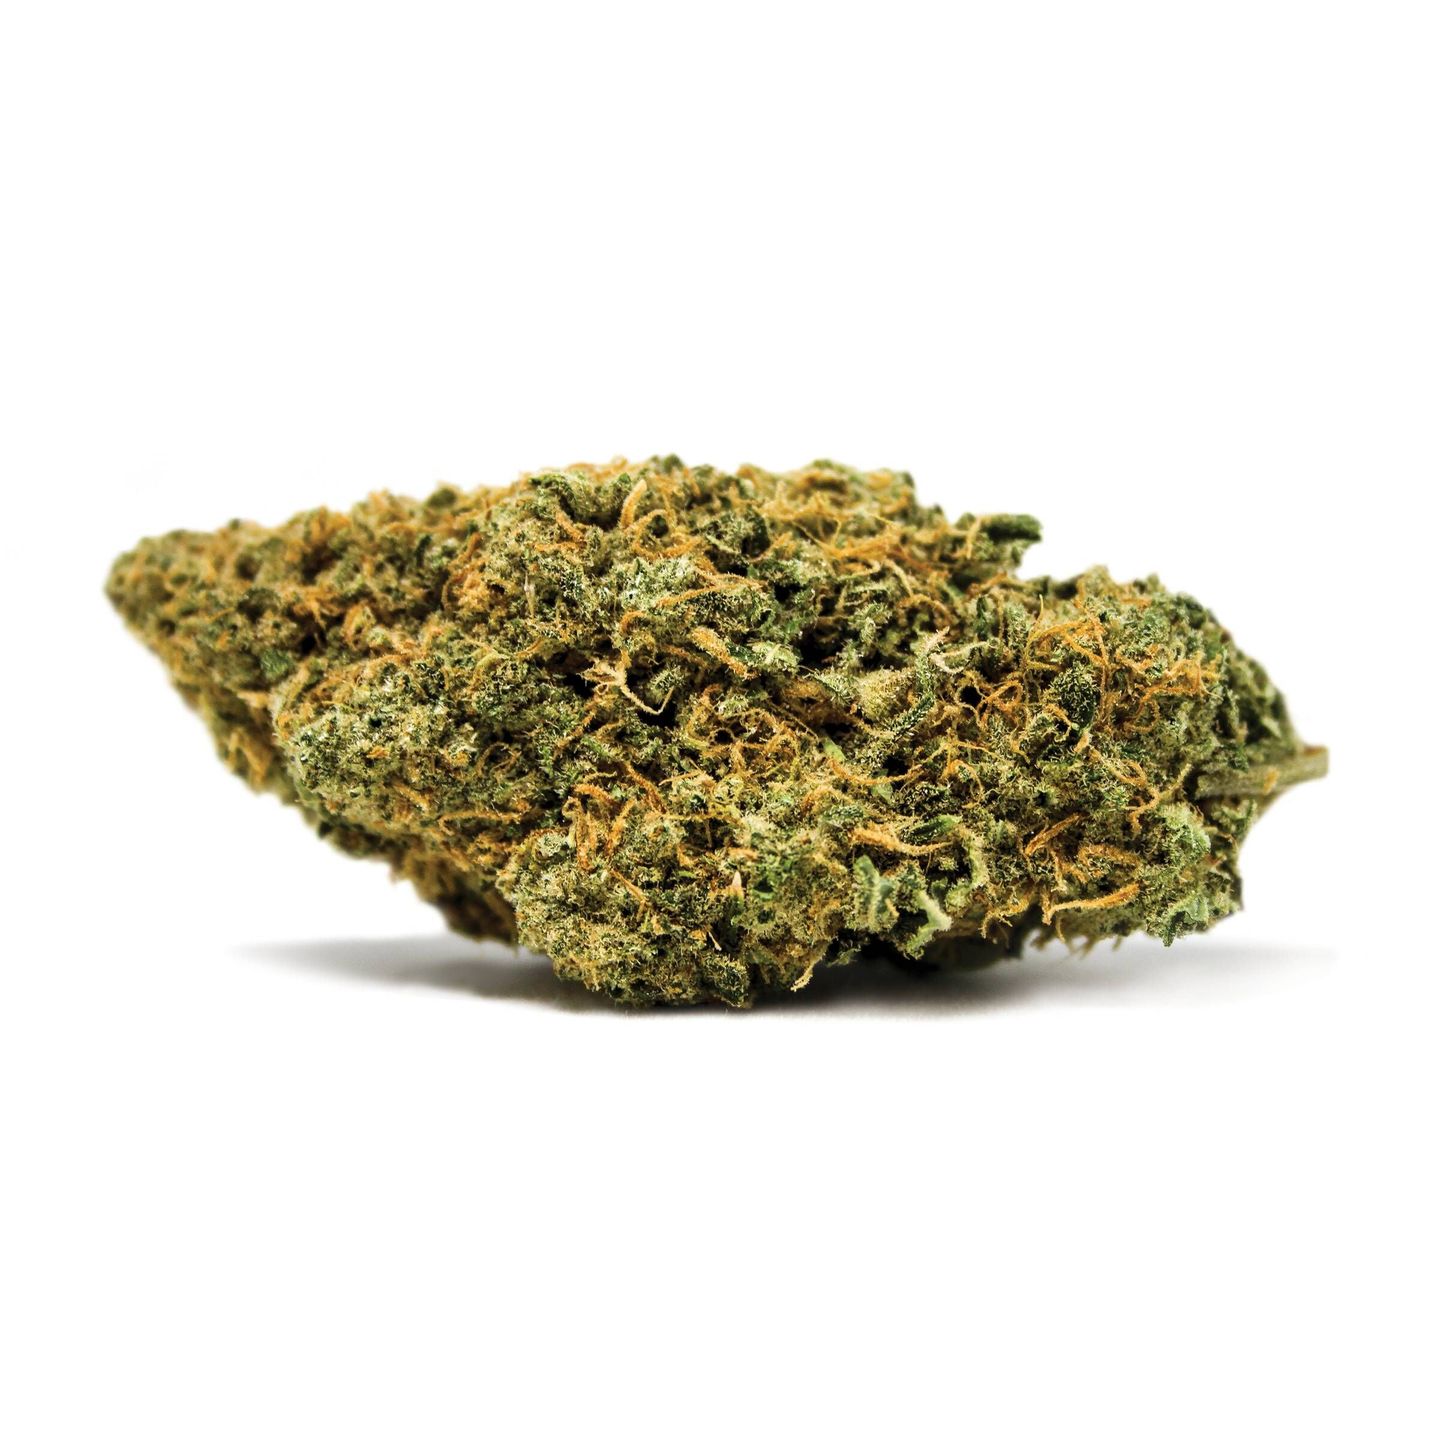 Cannabis Product White Widow by Spinach - 0